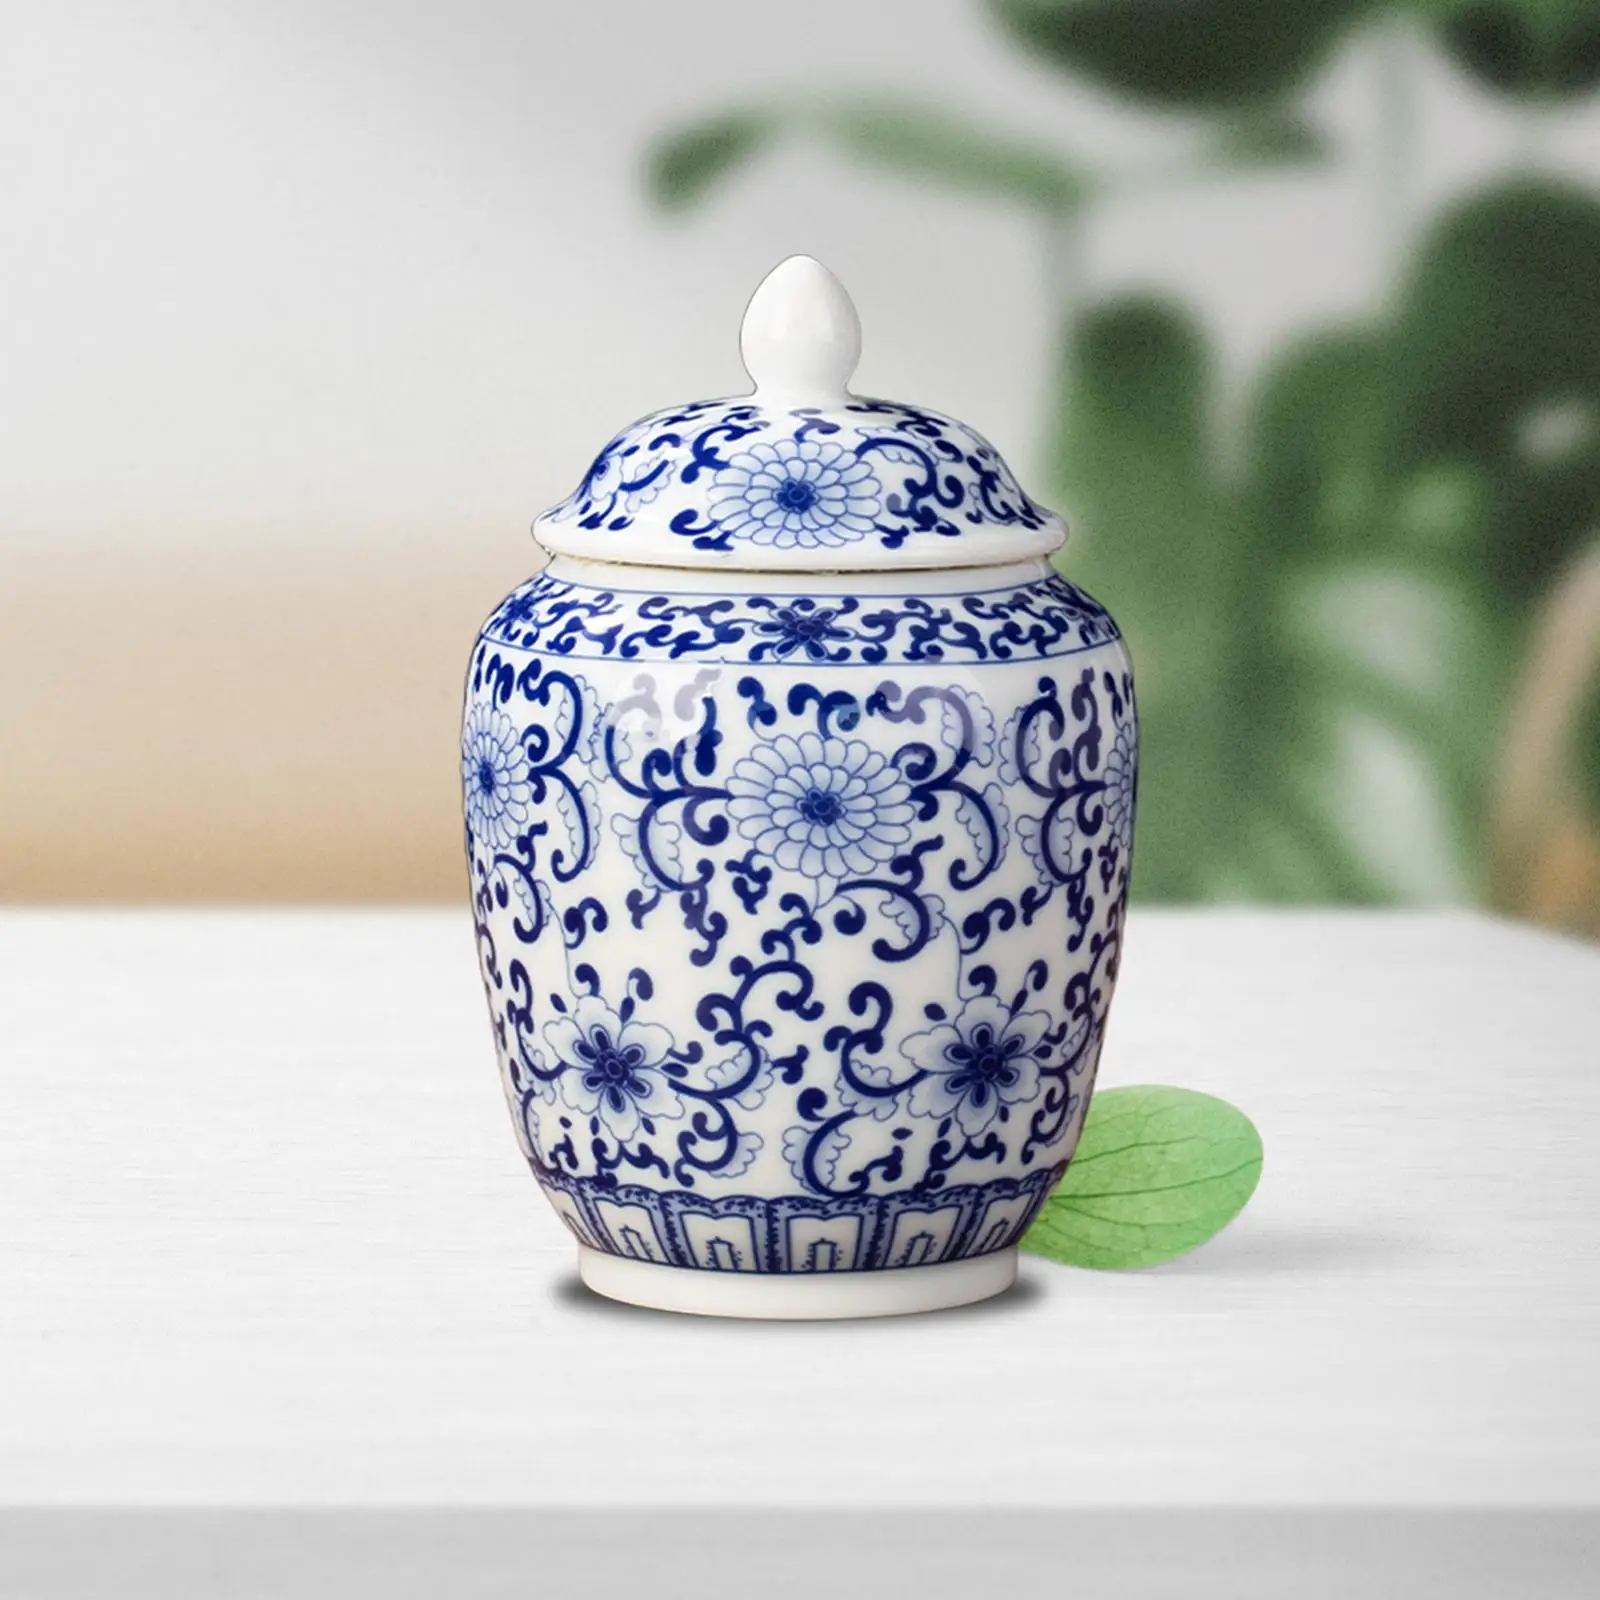 Ceramic Ginger Jar Gift Chinoiserie Traditional Porcelain Jars Vase for Weddings Wedding Countertop Table Decoration Home Decor